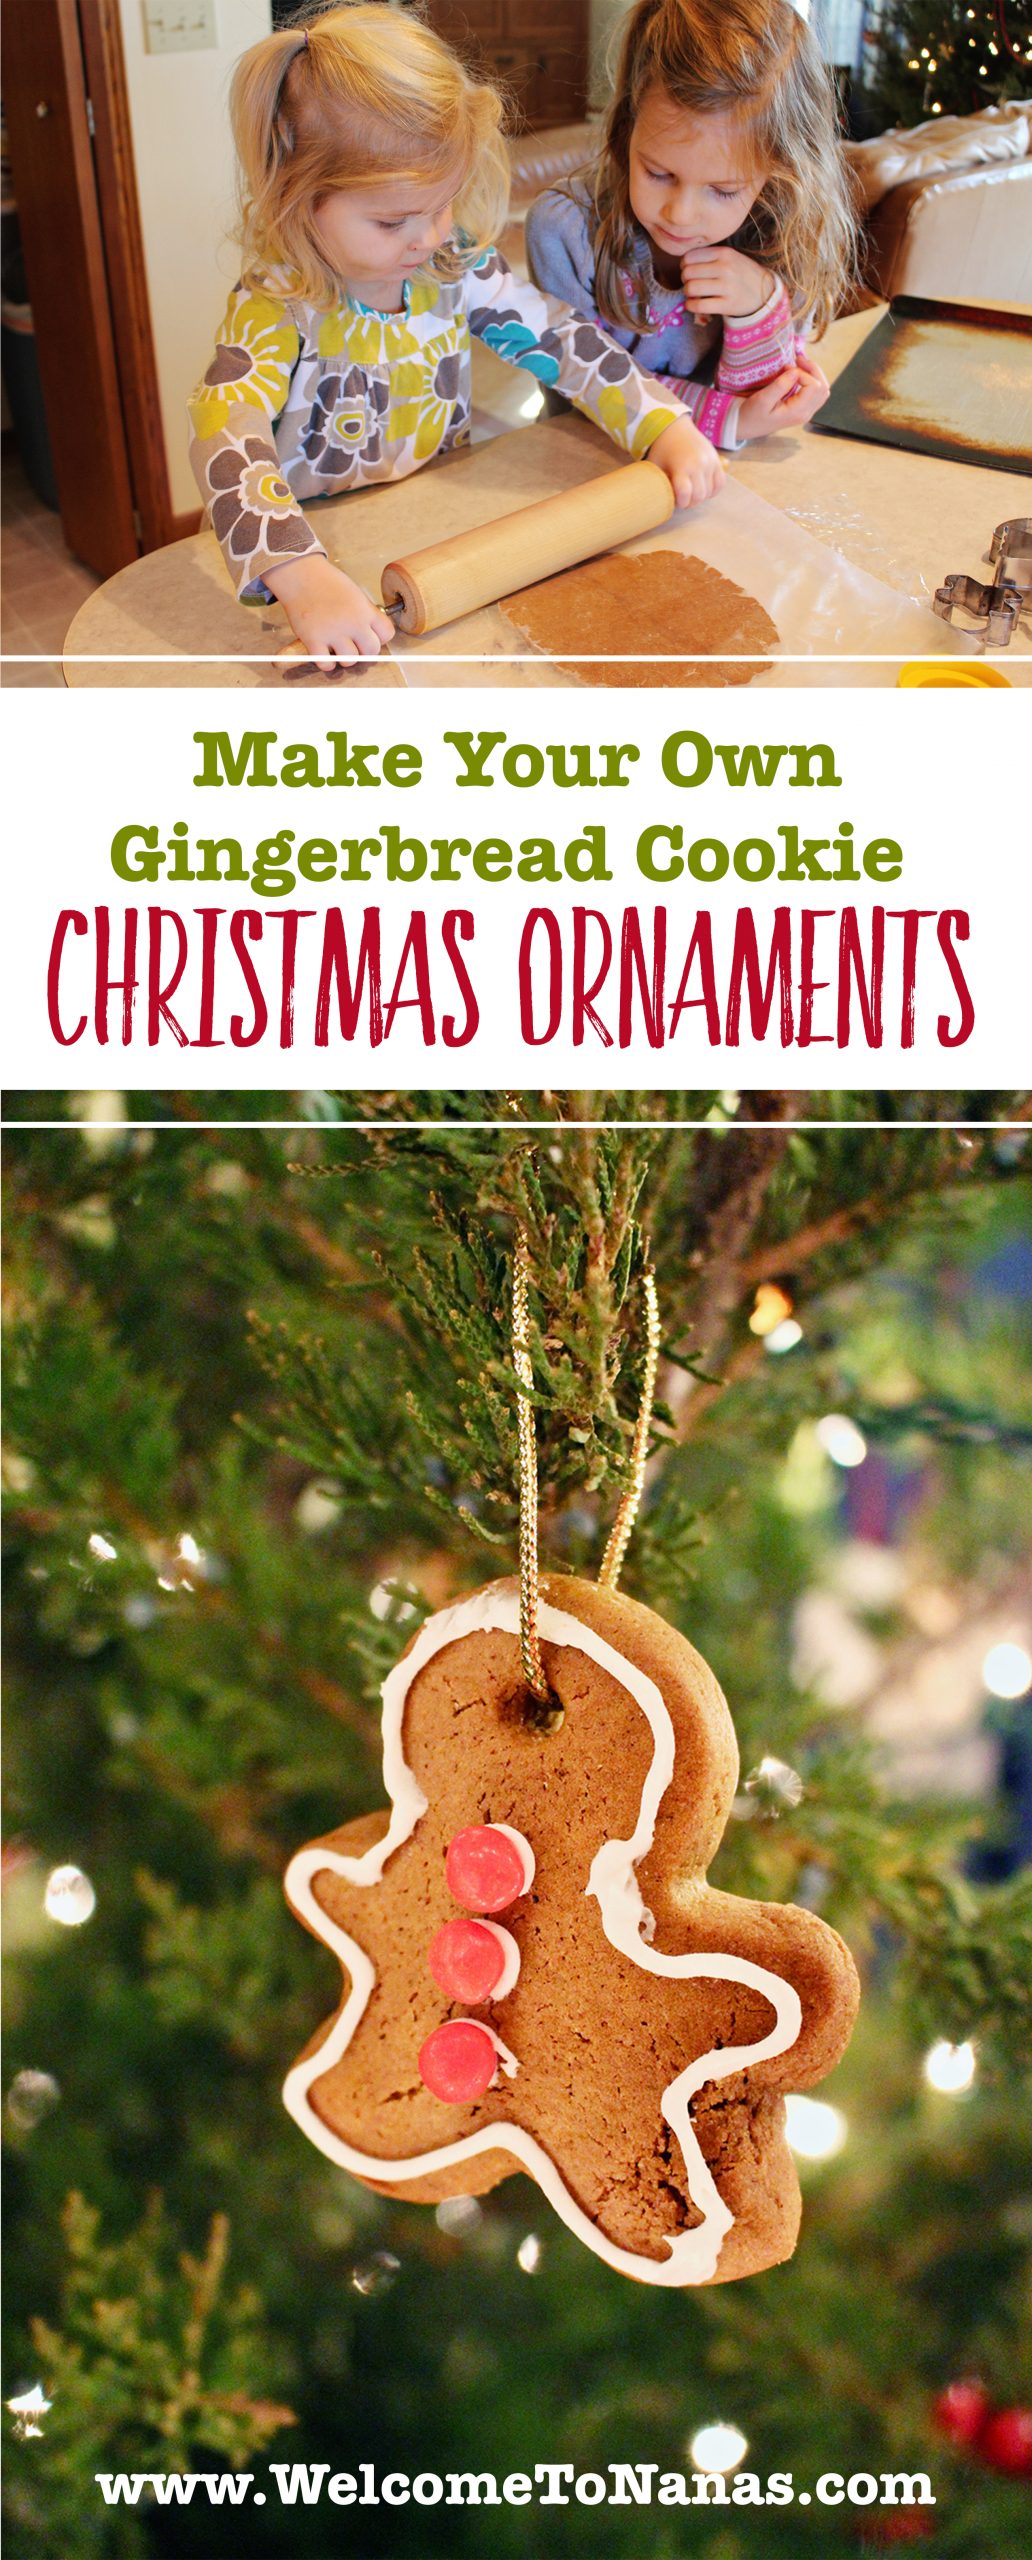 Two girls rolling out some gingerbread cookie dough, and a gingerbread man cookie ornament hanging from a Christmas tree. 